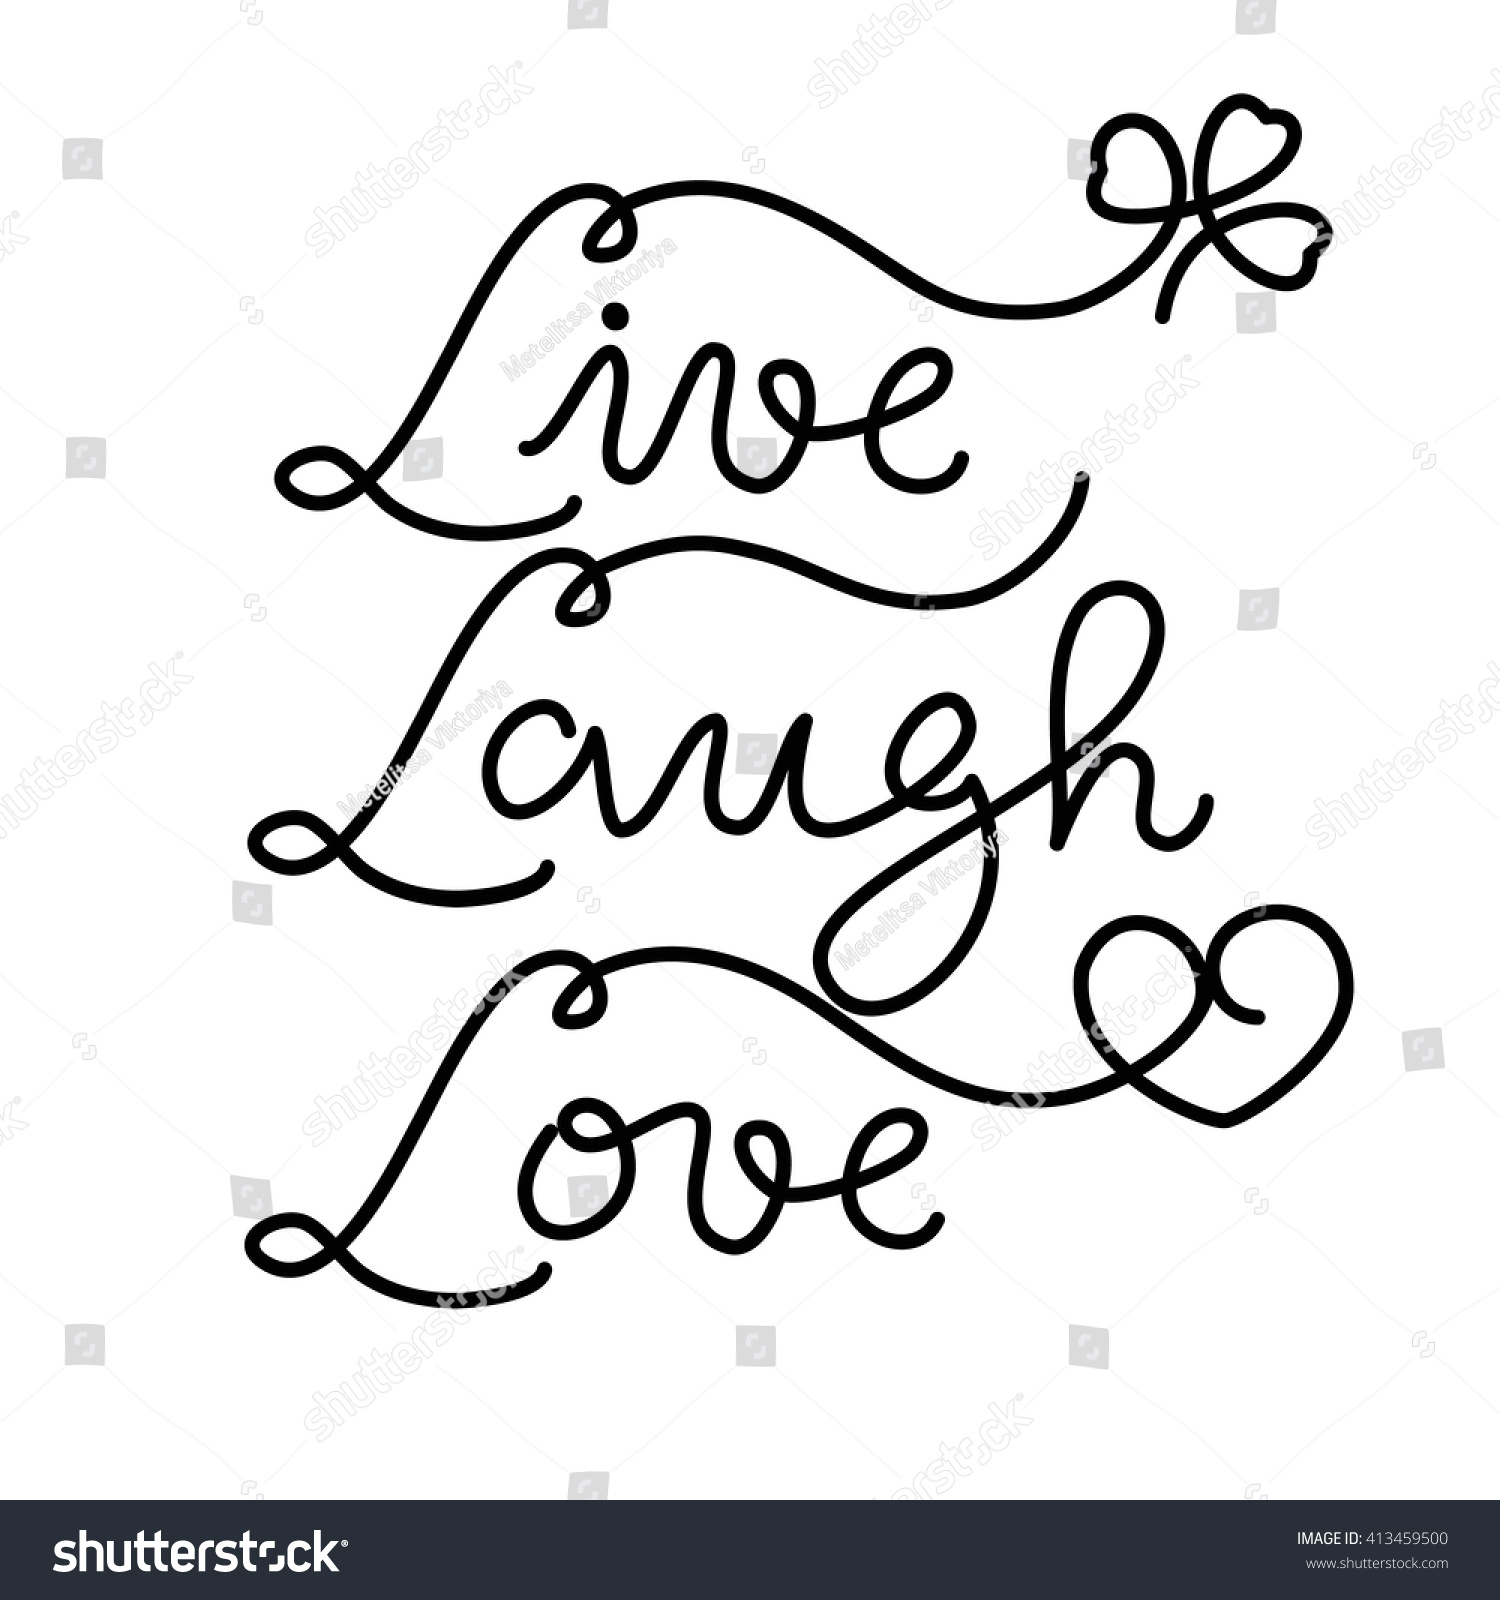 Inspirational quote "Live Laugh Love" Hand drawn typography poster Hand drawn calligraphy and